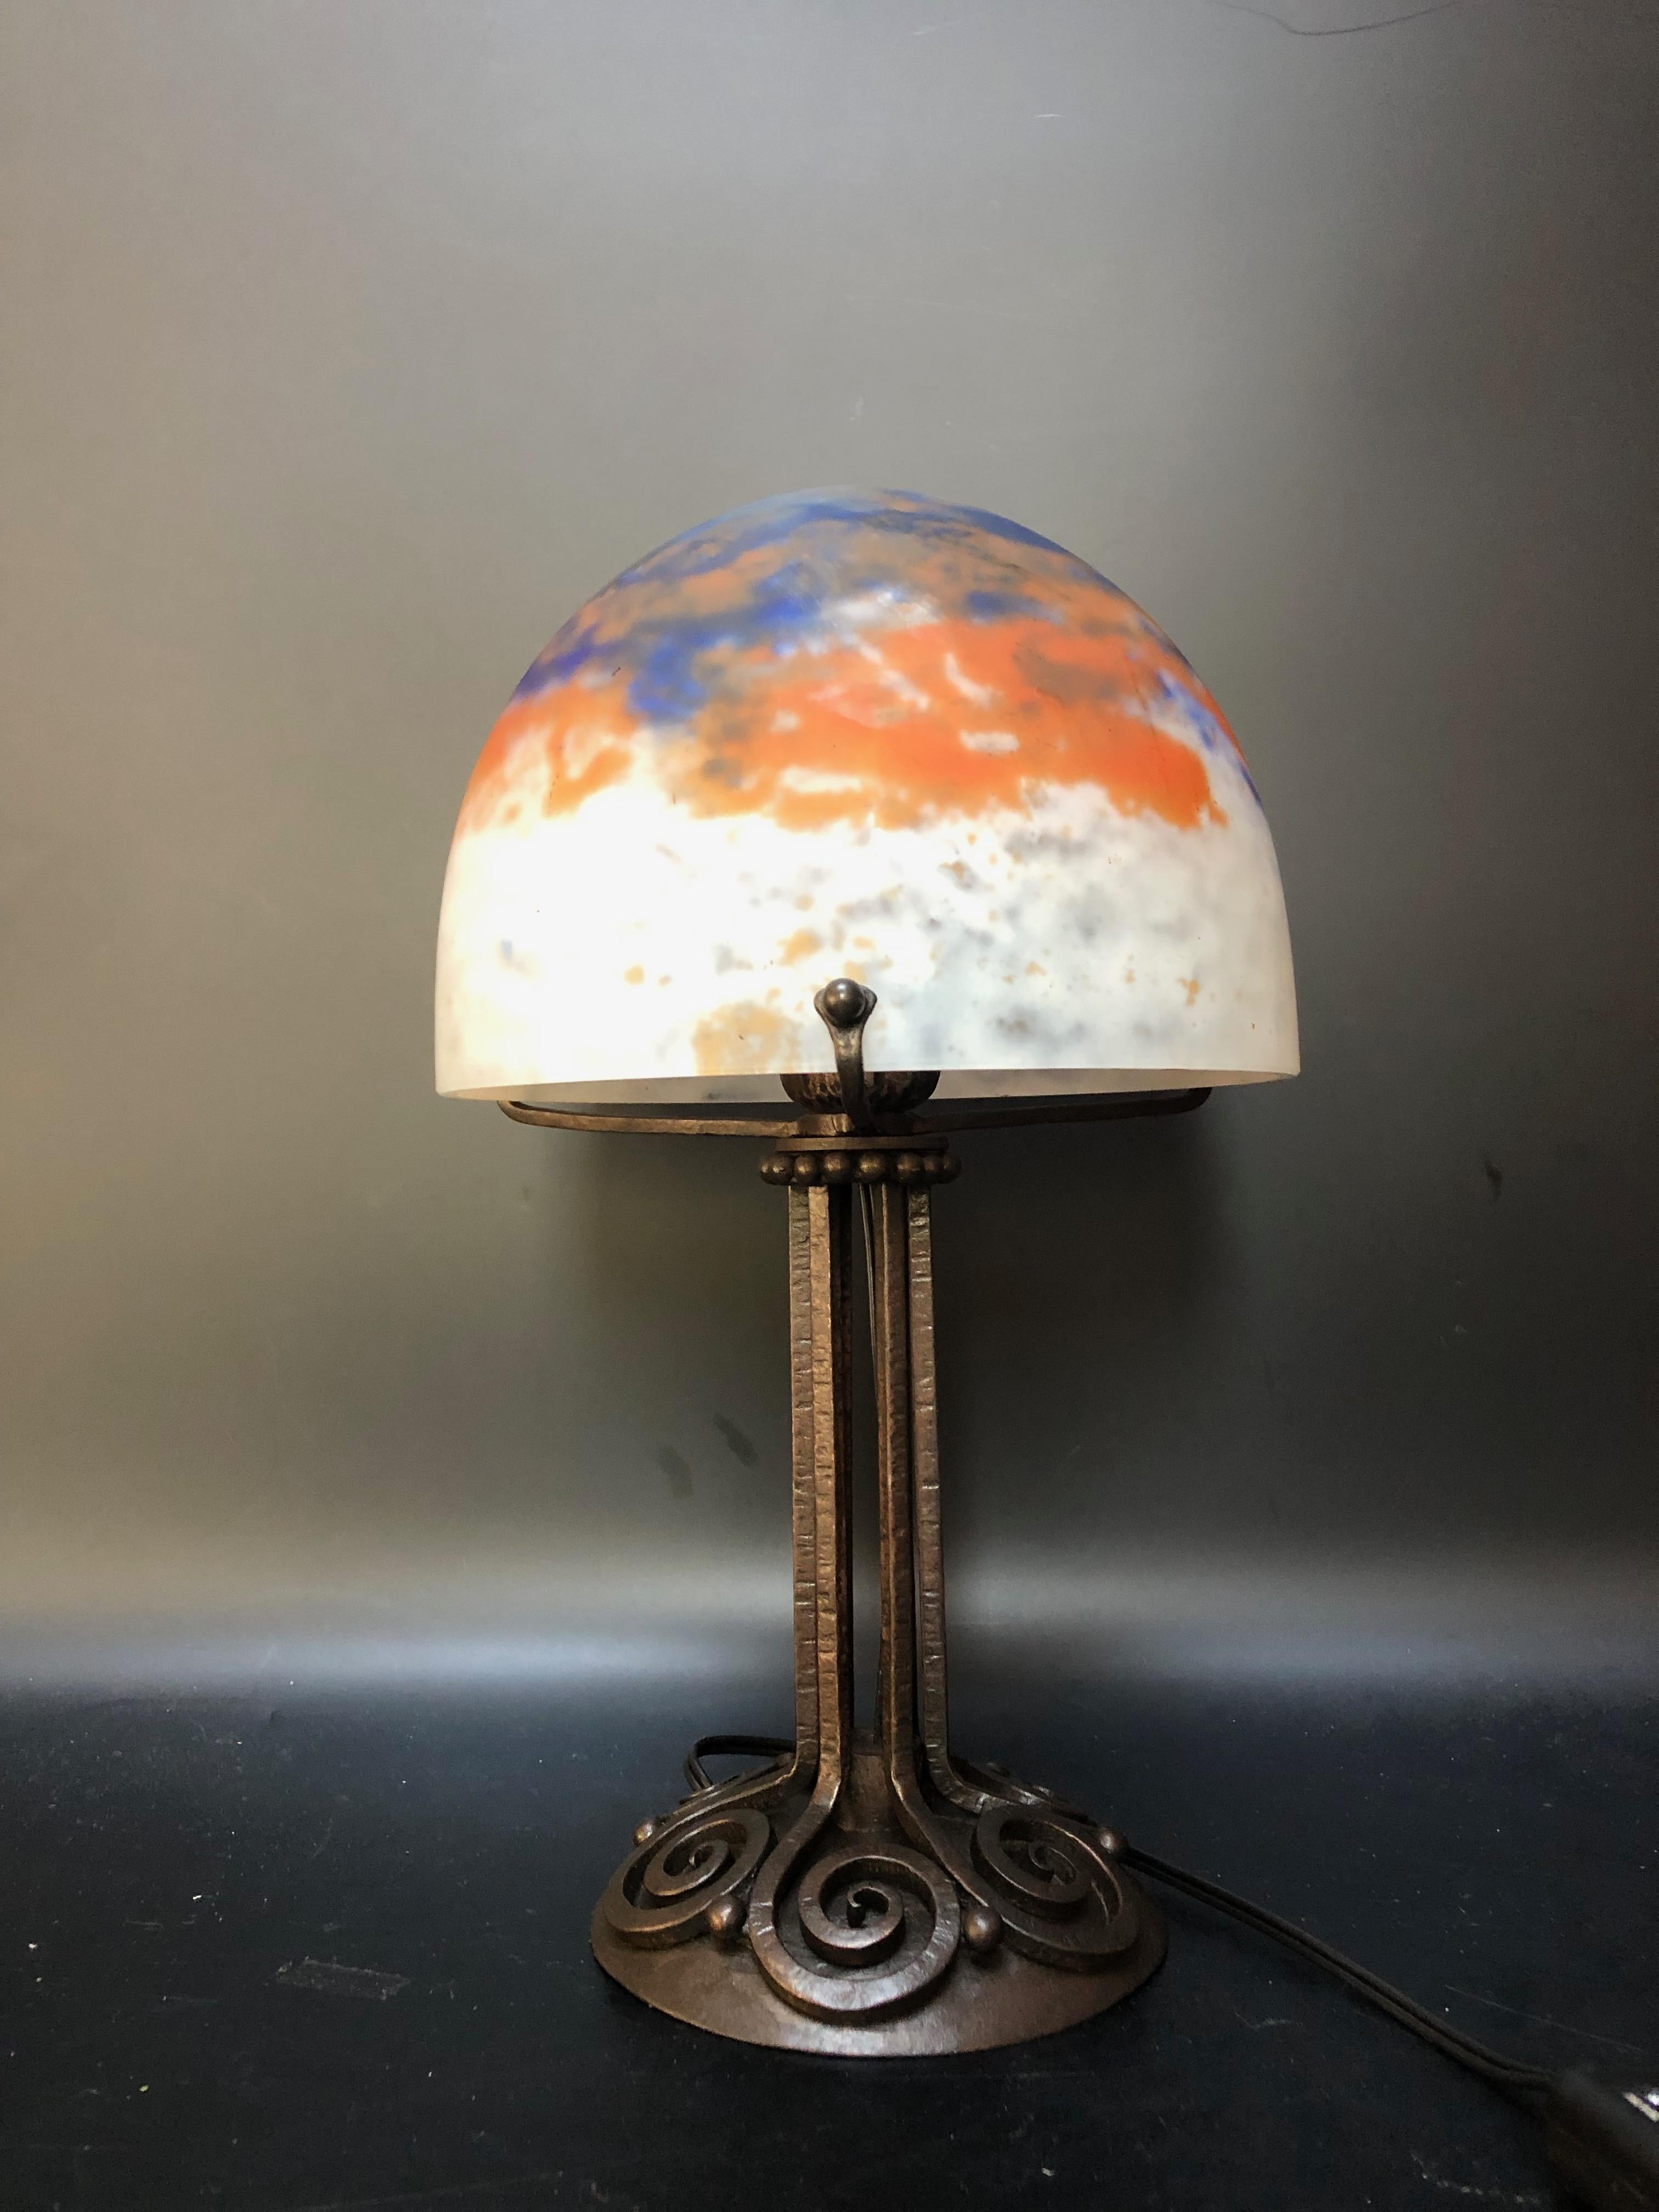 Art deco lamp circa 1925.
Wrought iron foot with spiral decoration, stamped E. Brandt.
Shell in blue and orange speckled white glass paste signed Daum Nancy France.
Electrified and in perfect condition.
Total height: 30cm
Base diameter: 11.8